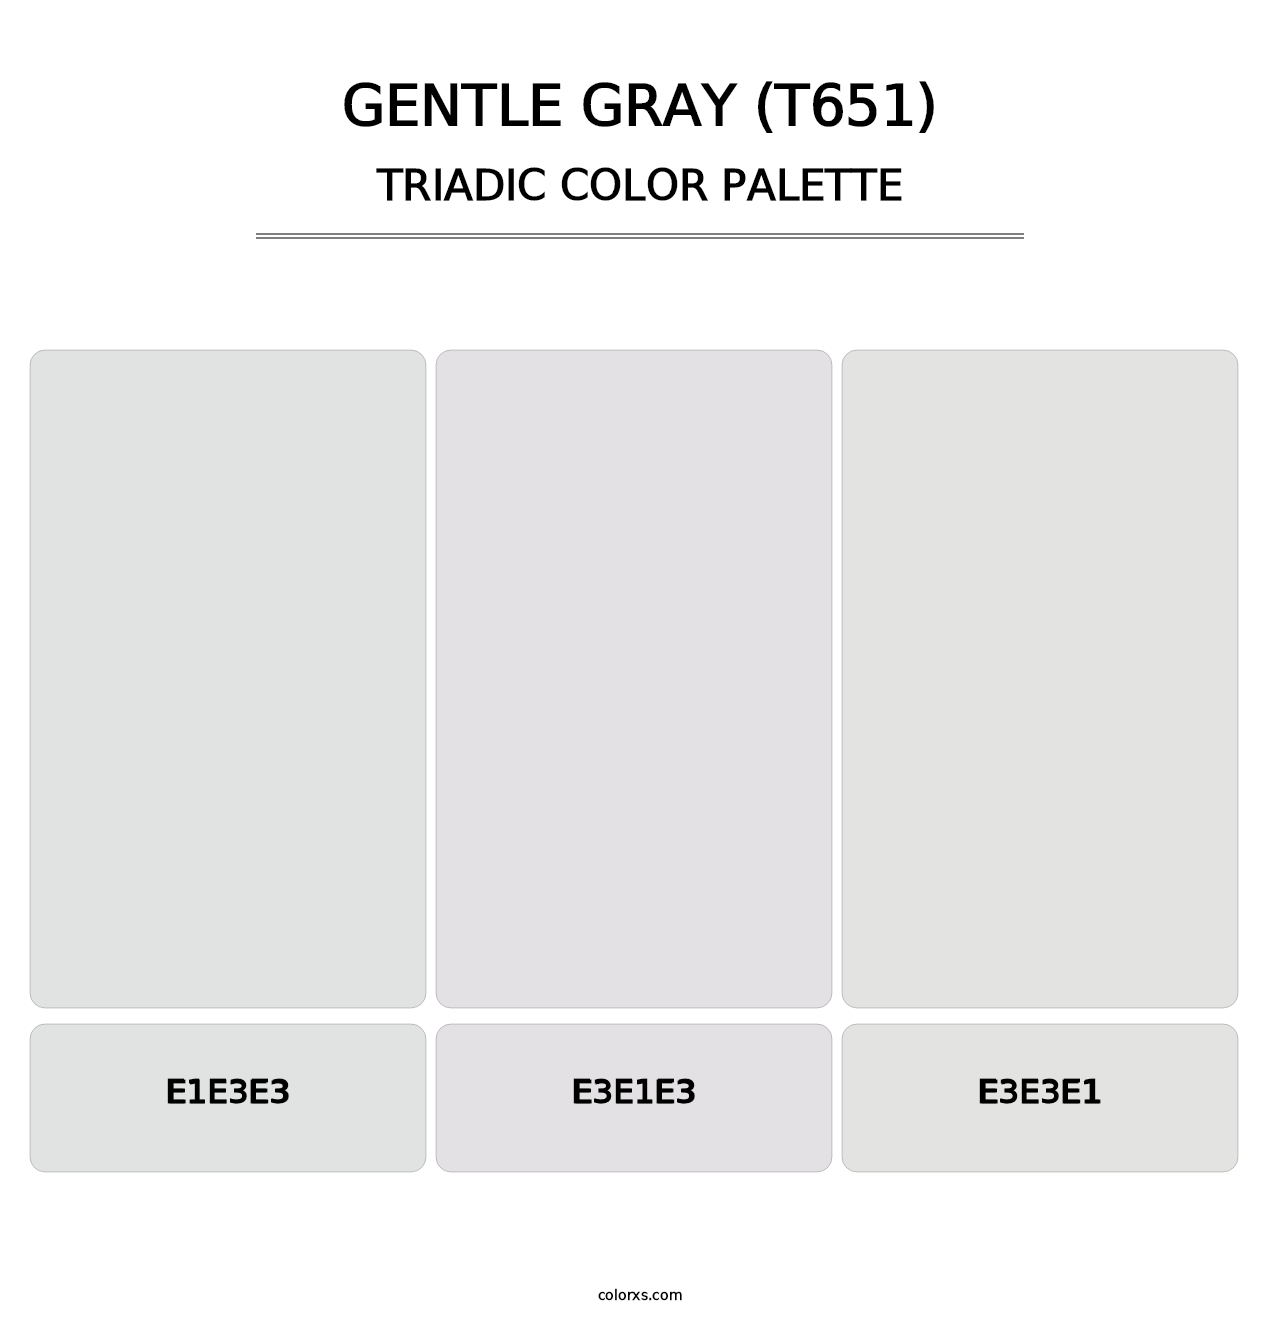 Gentle Gray (T651) - Triadic Color Palette